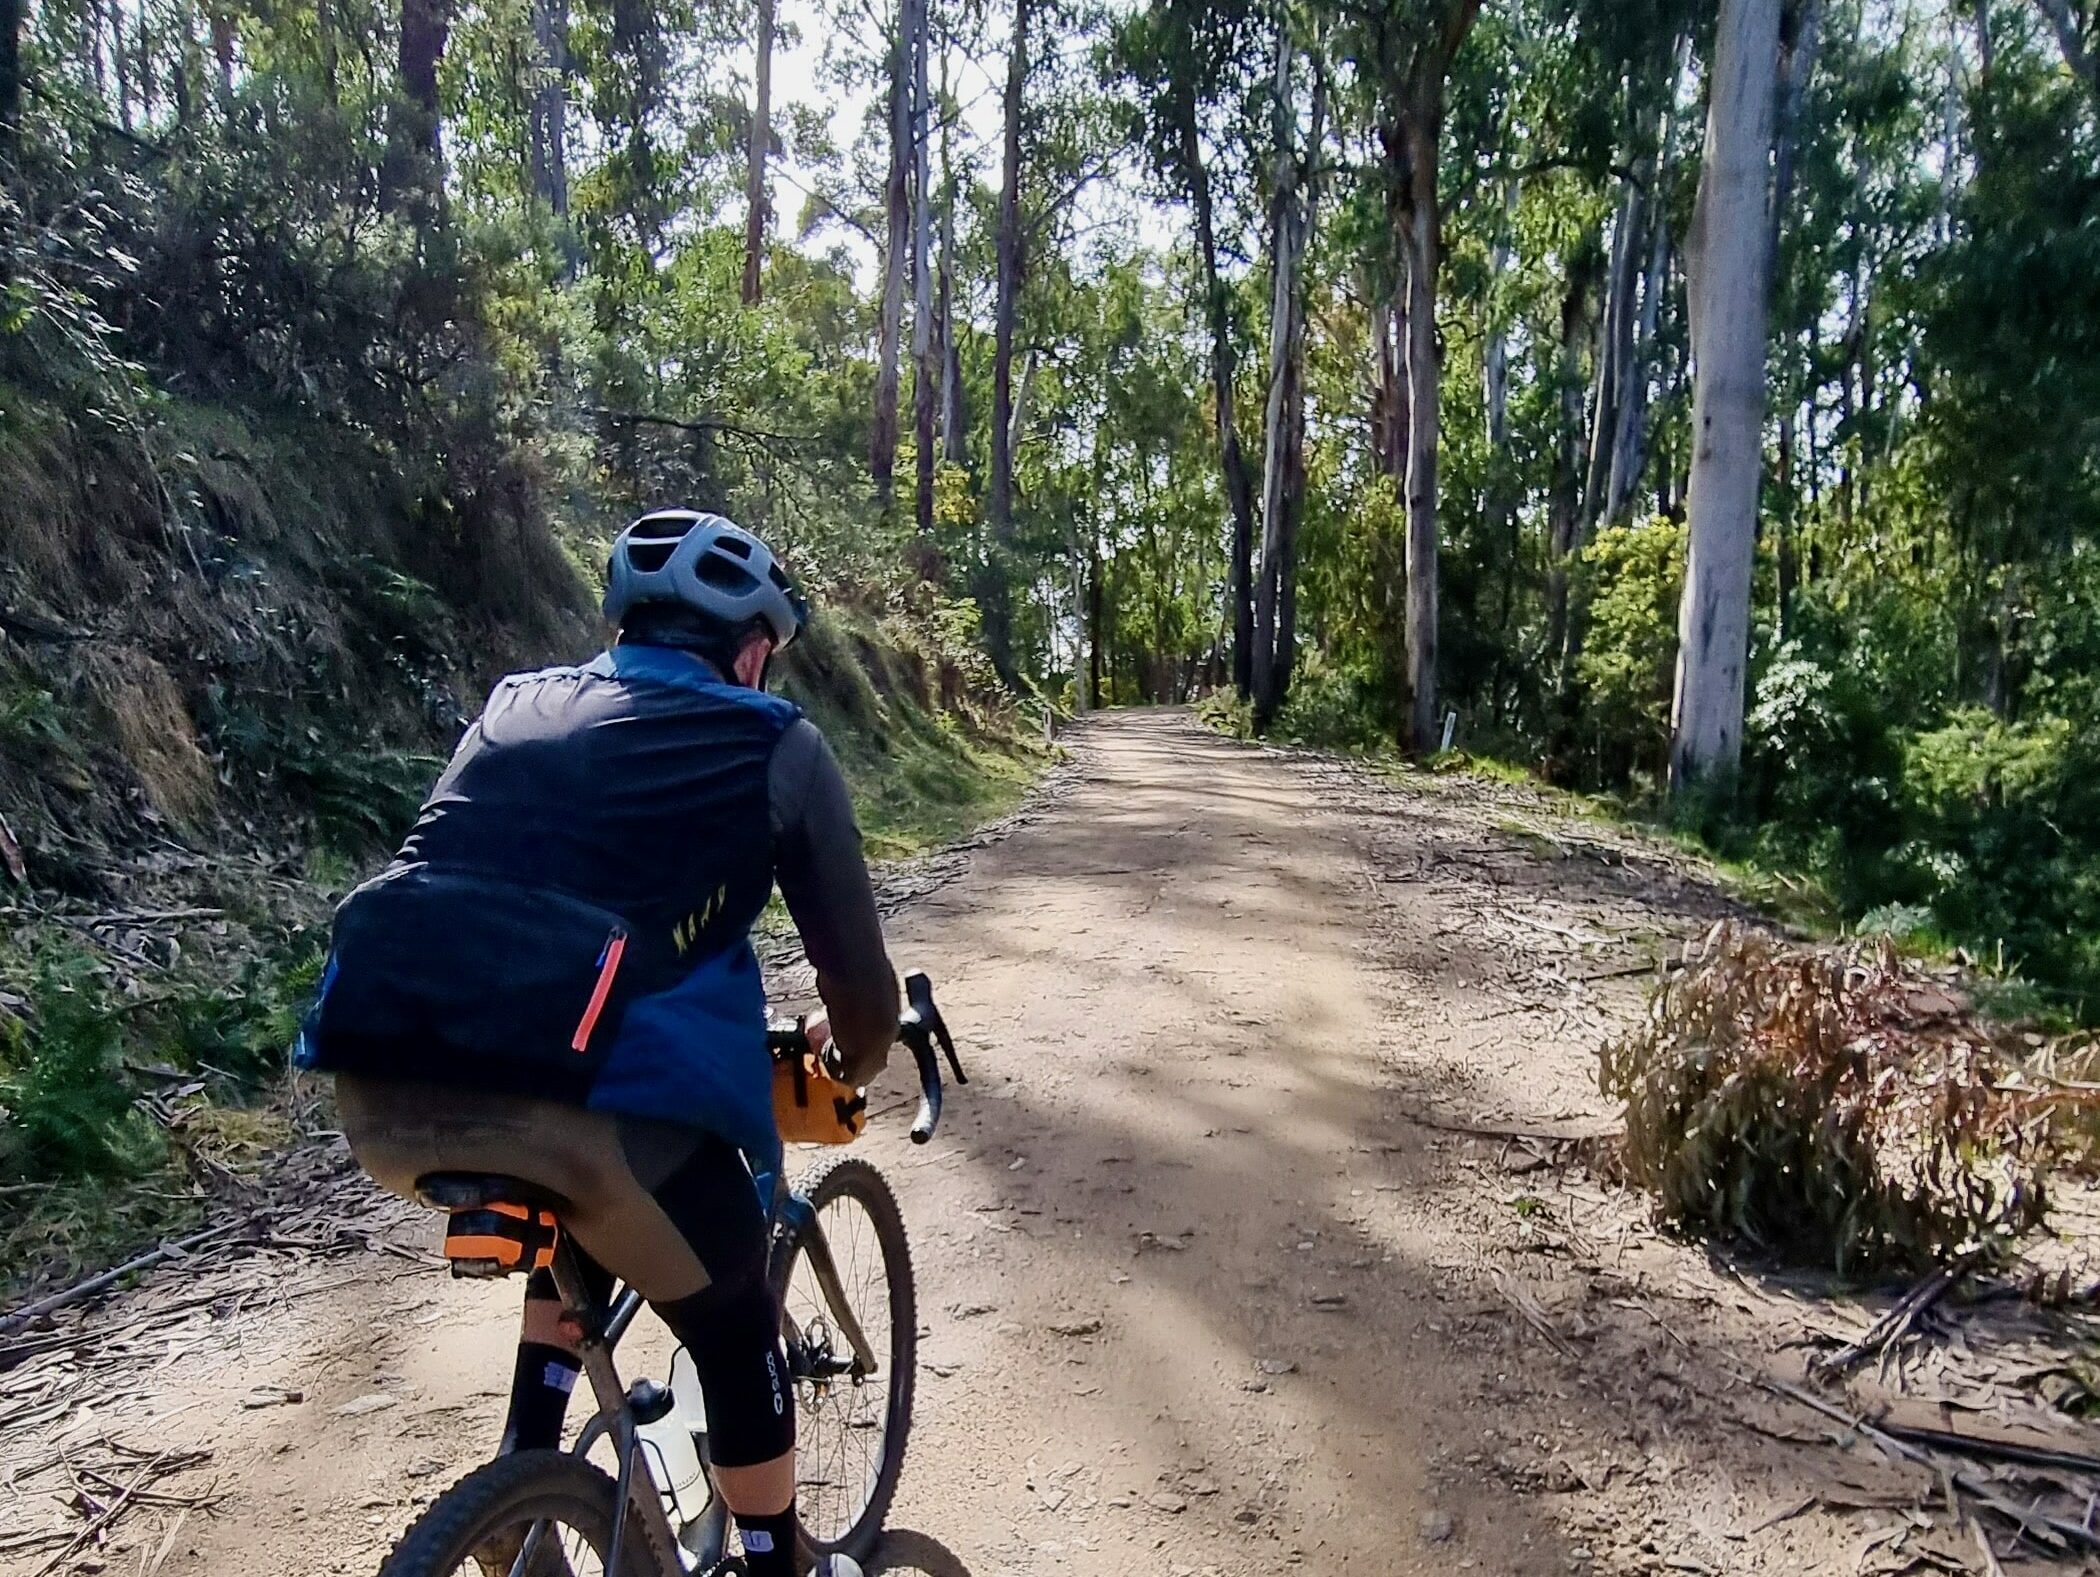 Gravel road rising up through native forest and cyclist on a gravel bike riding 